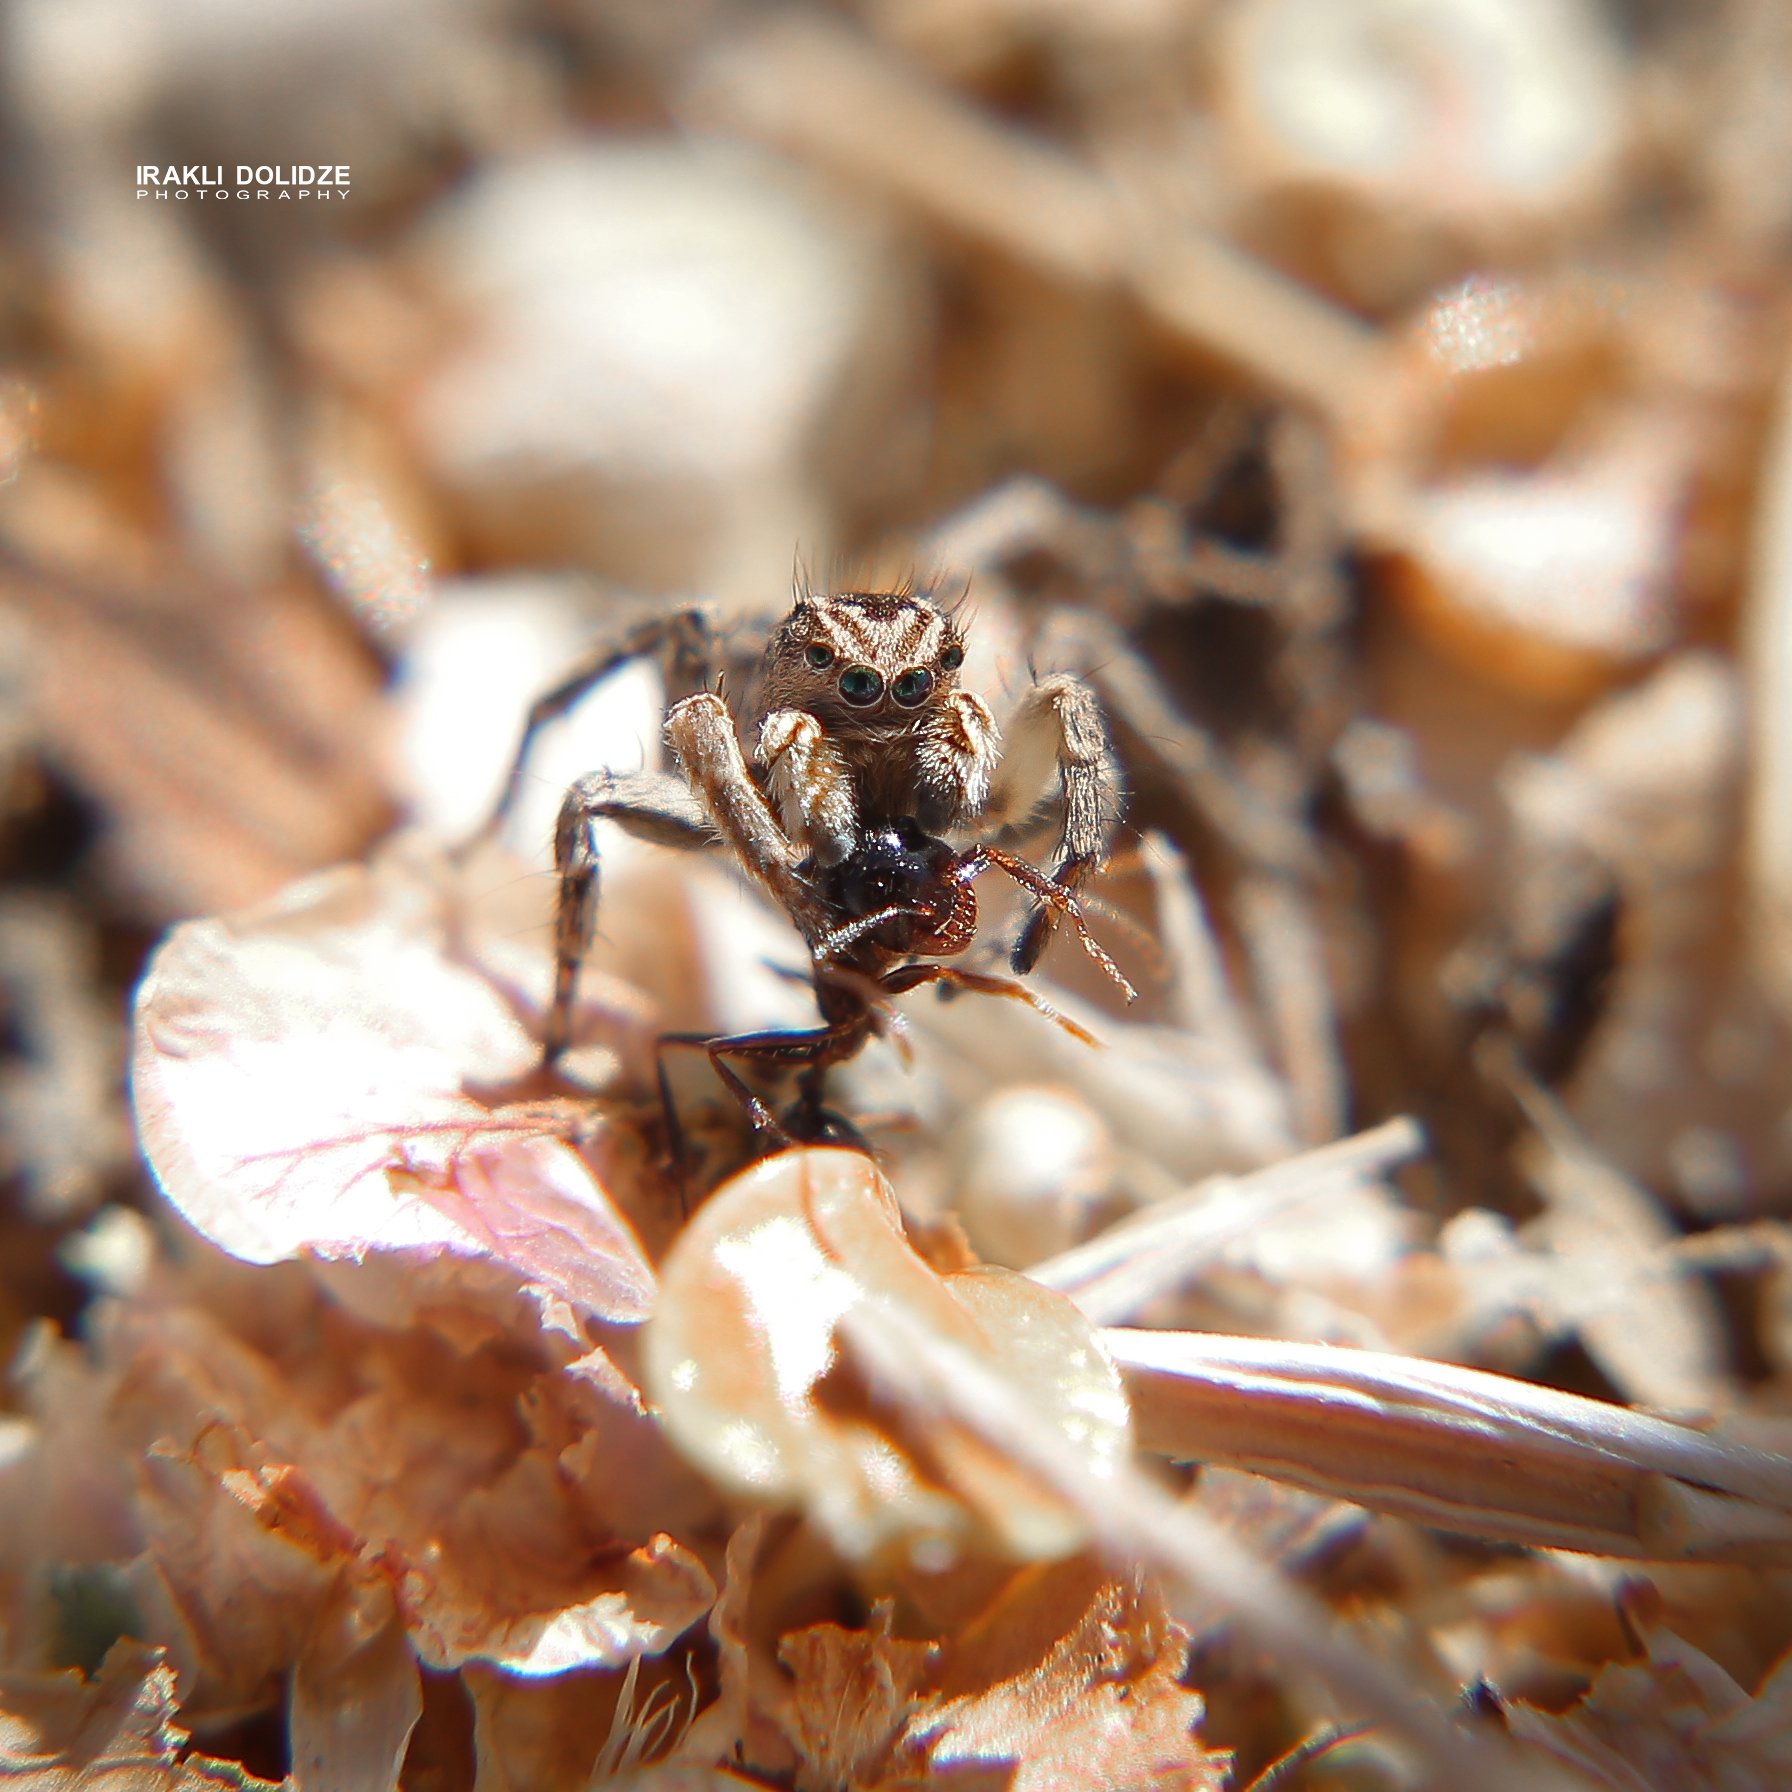 spider, ant, launch, eating, nature, outdoor, close-up, macro, photography, ირაკლი დოლიძე